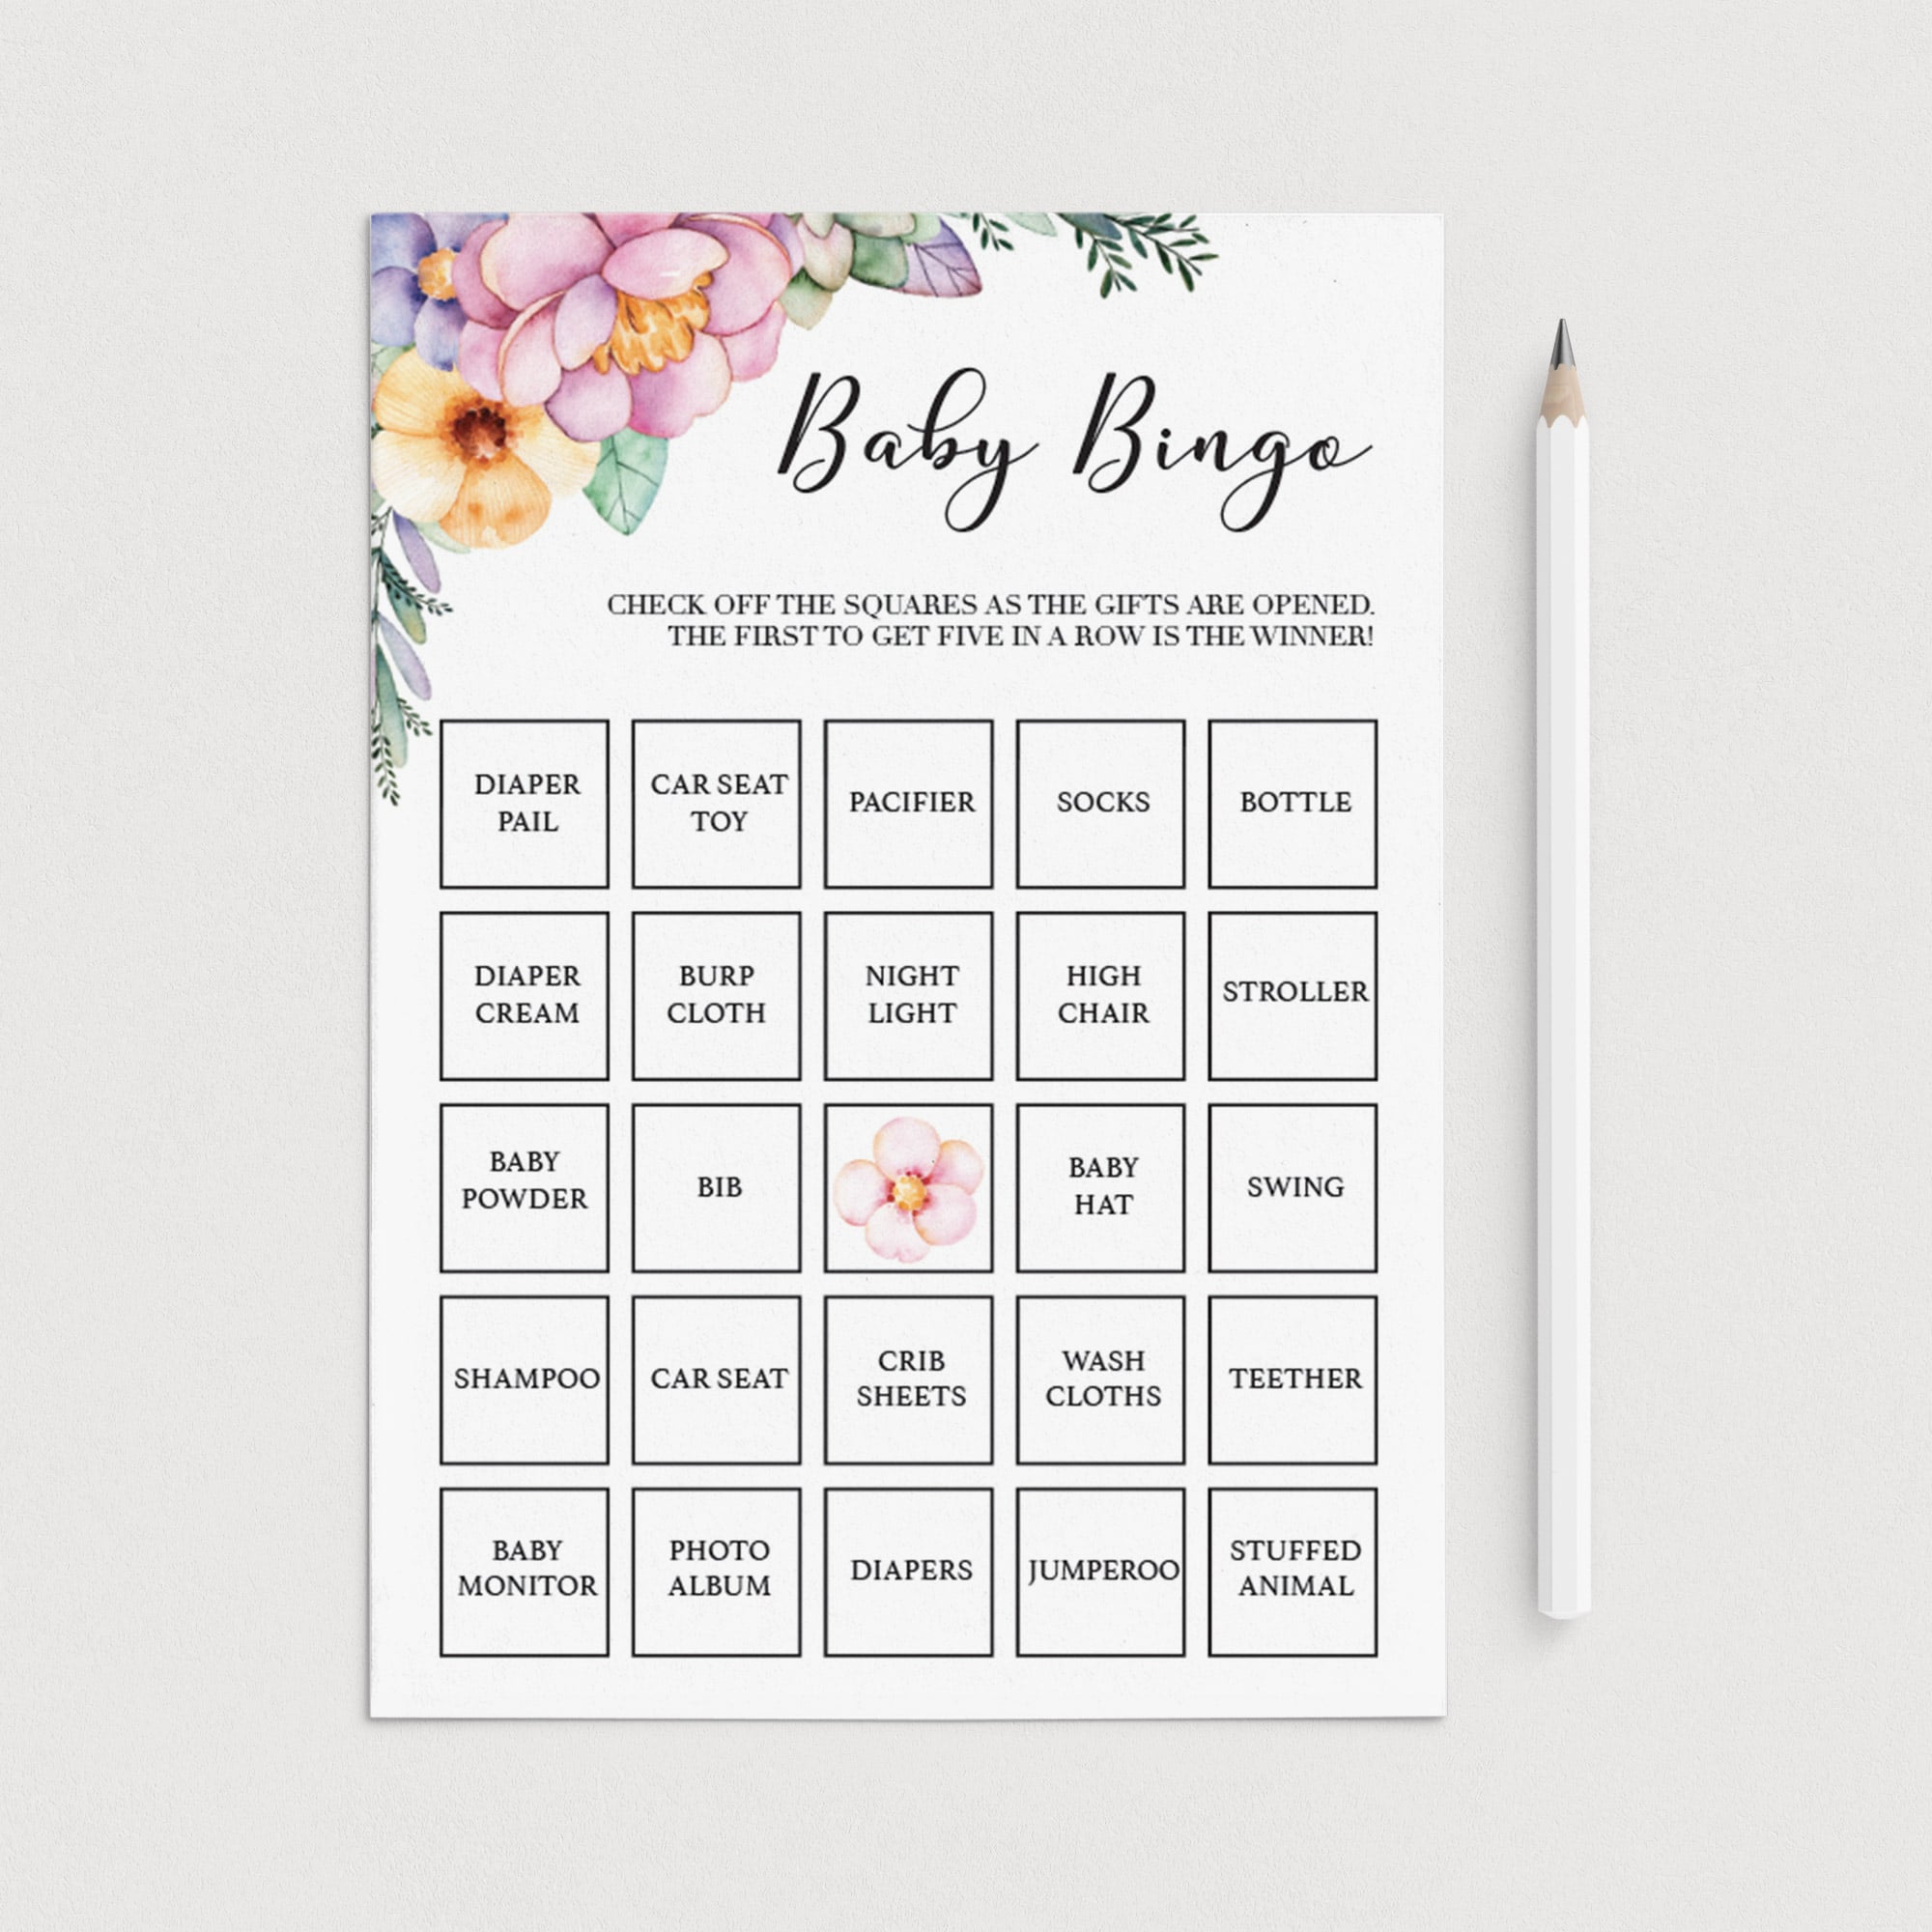 Pastel floral baby shower bingo game printable by LittleSizzle